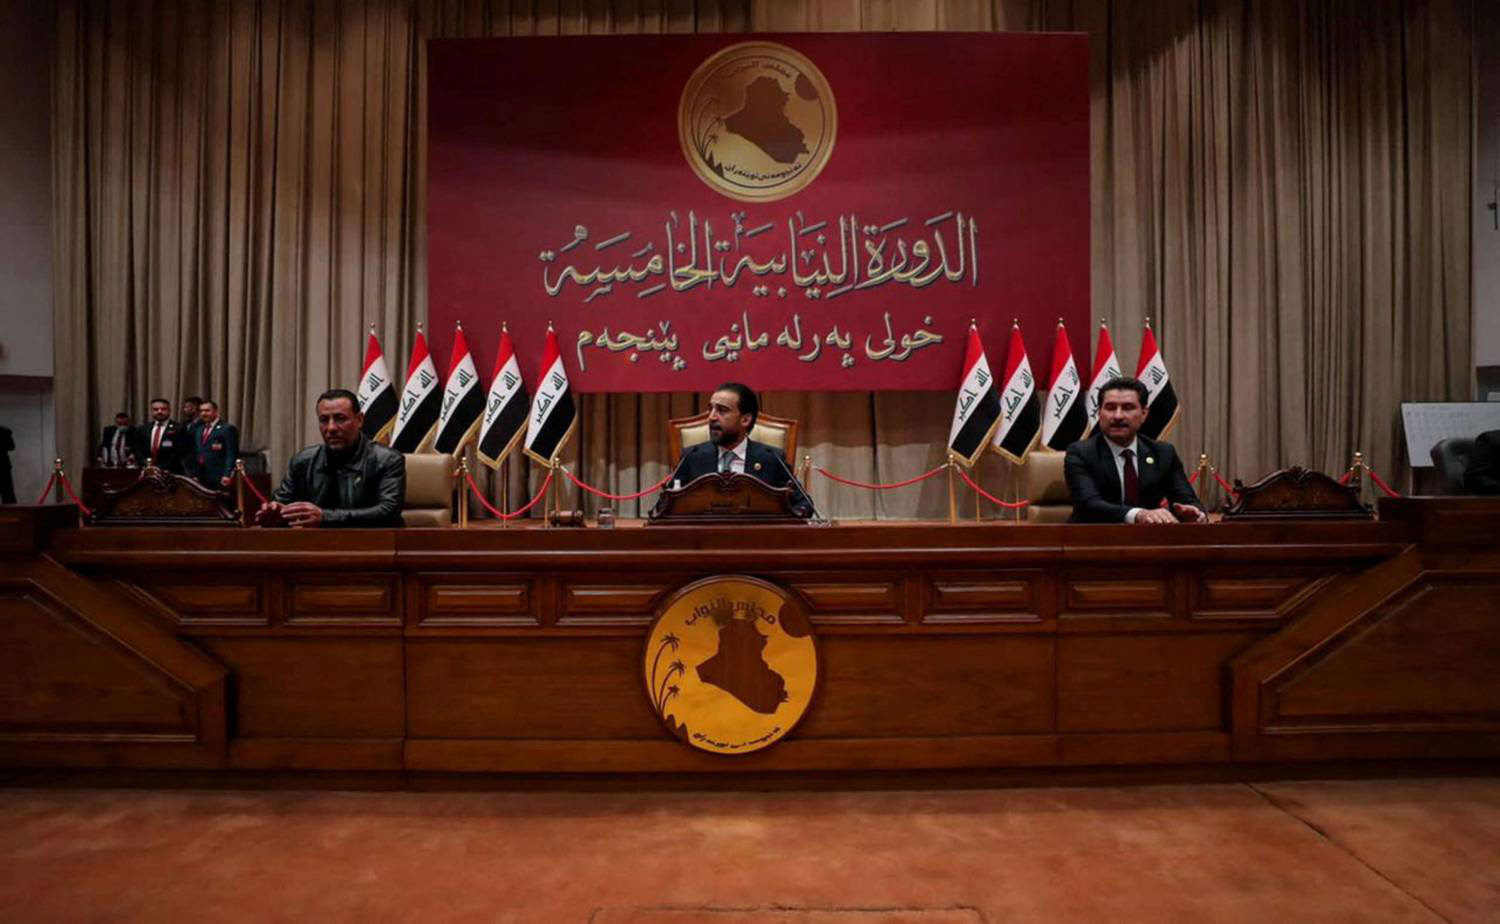 The Iraqi parliaments resumption of its sessions - an approach to ending the intractability or coexisting with the crisis